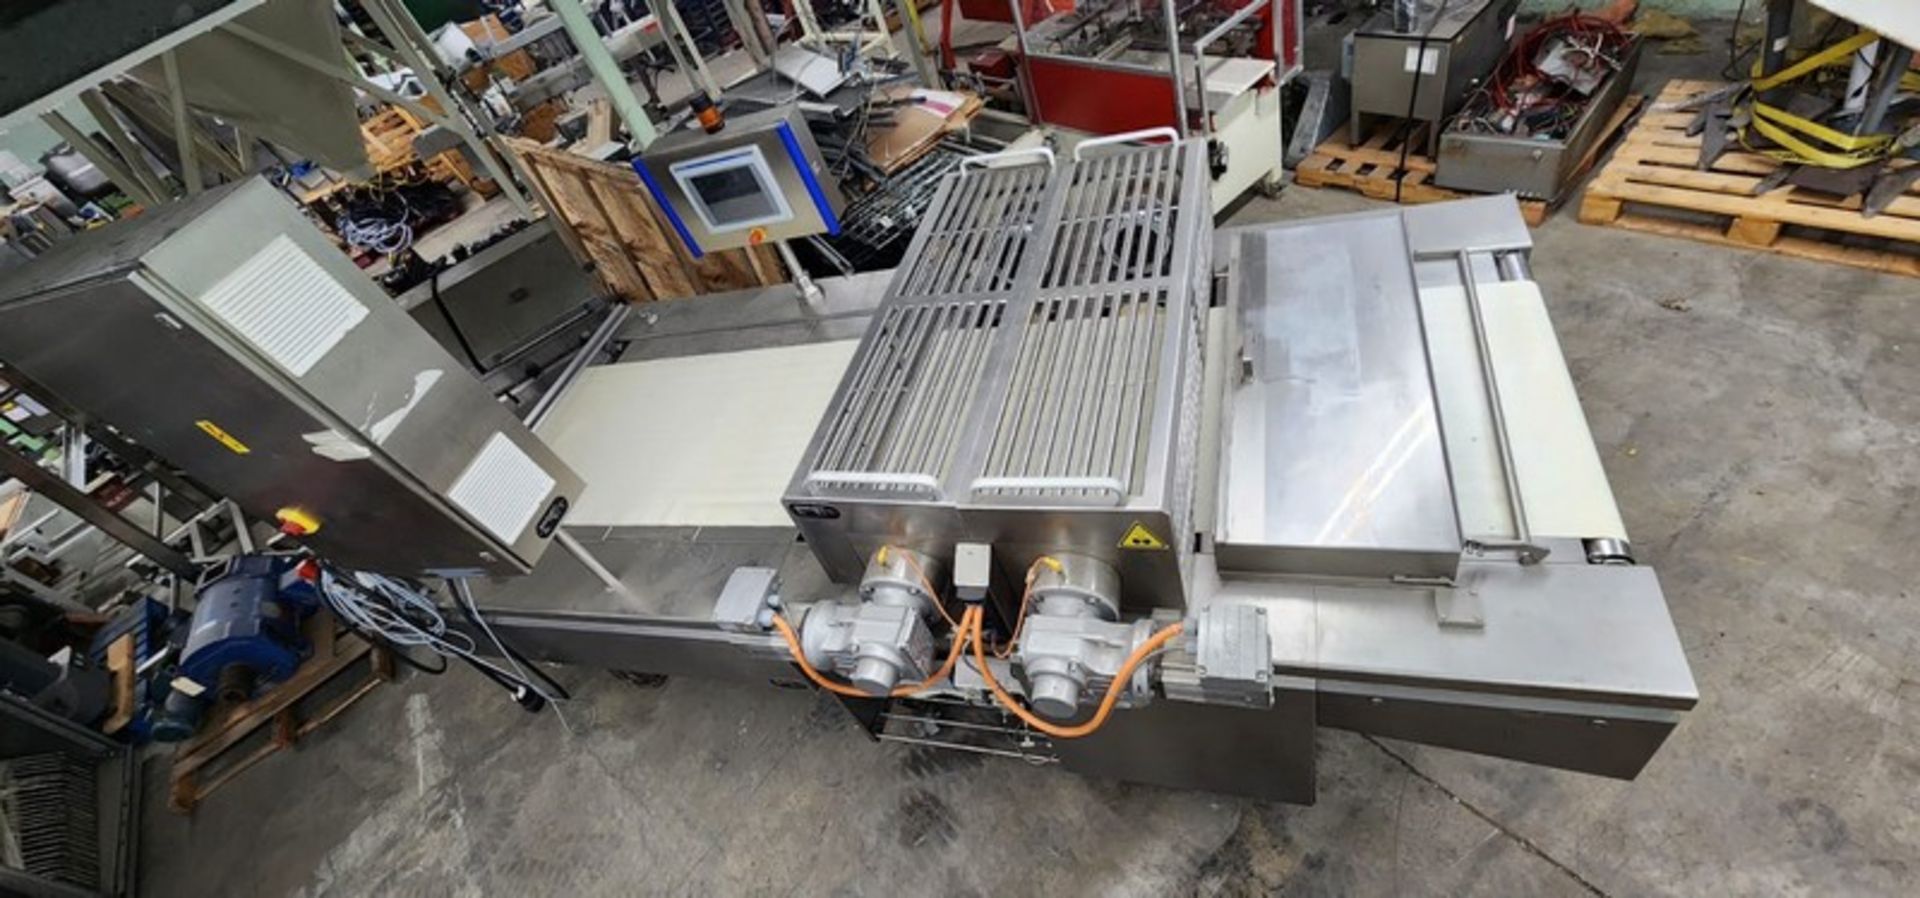 Rotary cookie Moulder Franz Haas Waffel and Keksanlagen System, Year 2011 Model DUC, Serial Number - Image 2 of 11